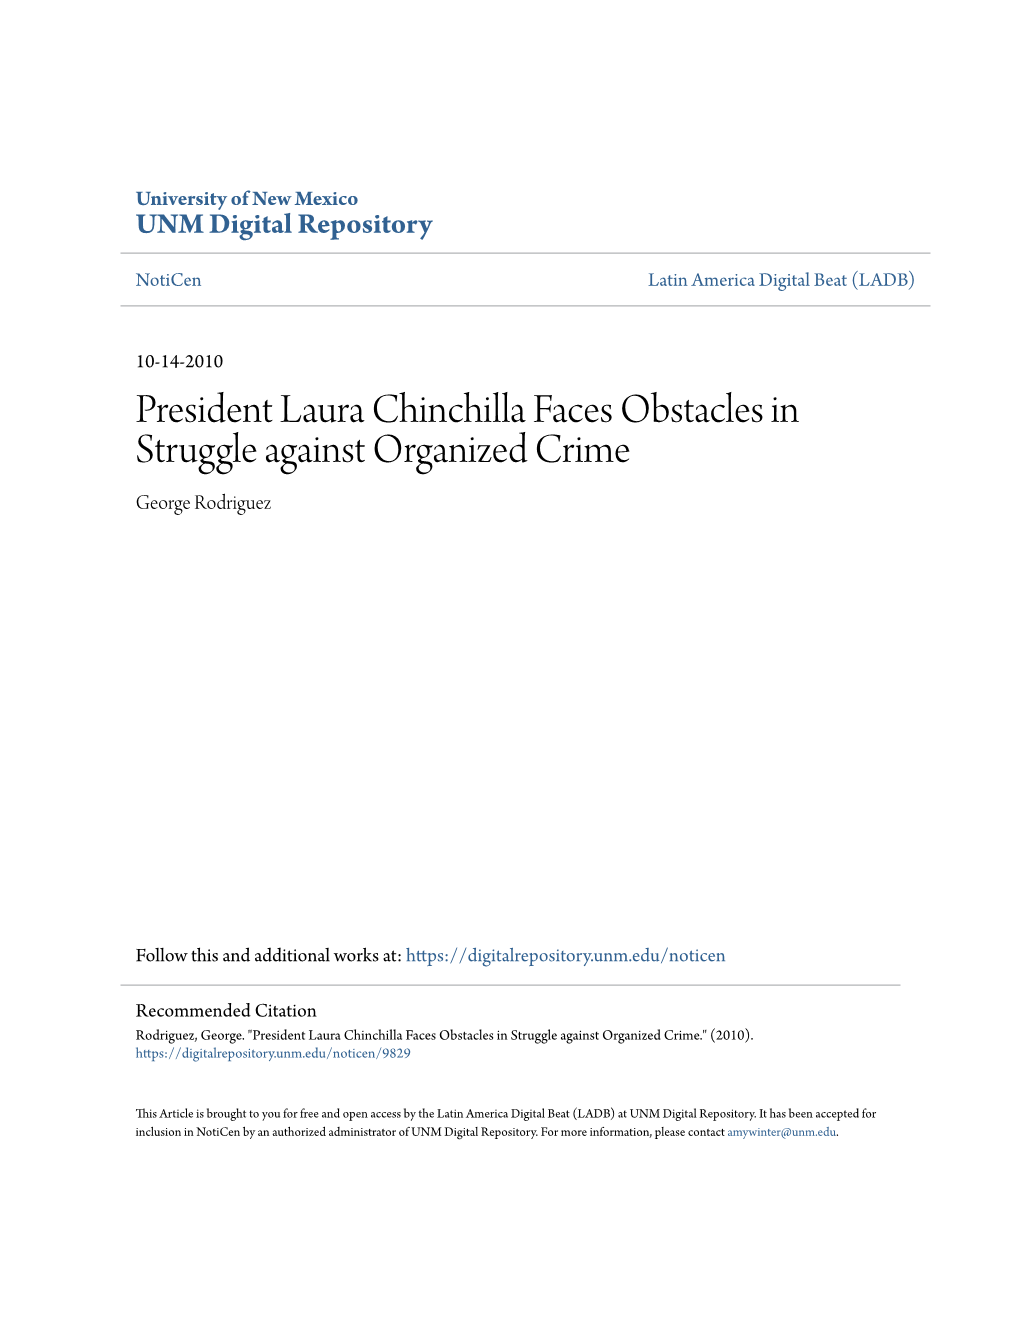 President Laura Chinchilla Faces Obstacles in Struggle Against Organized Crime George Rodriguez